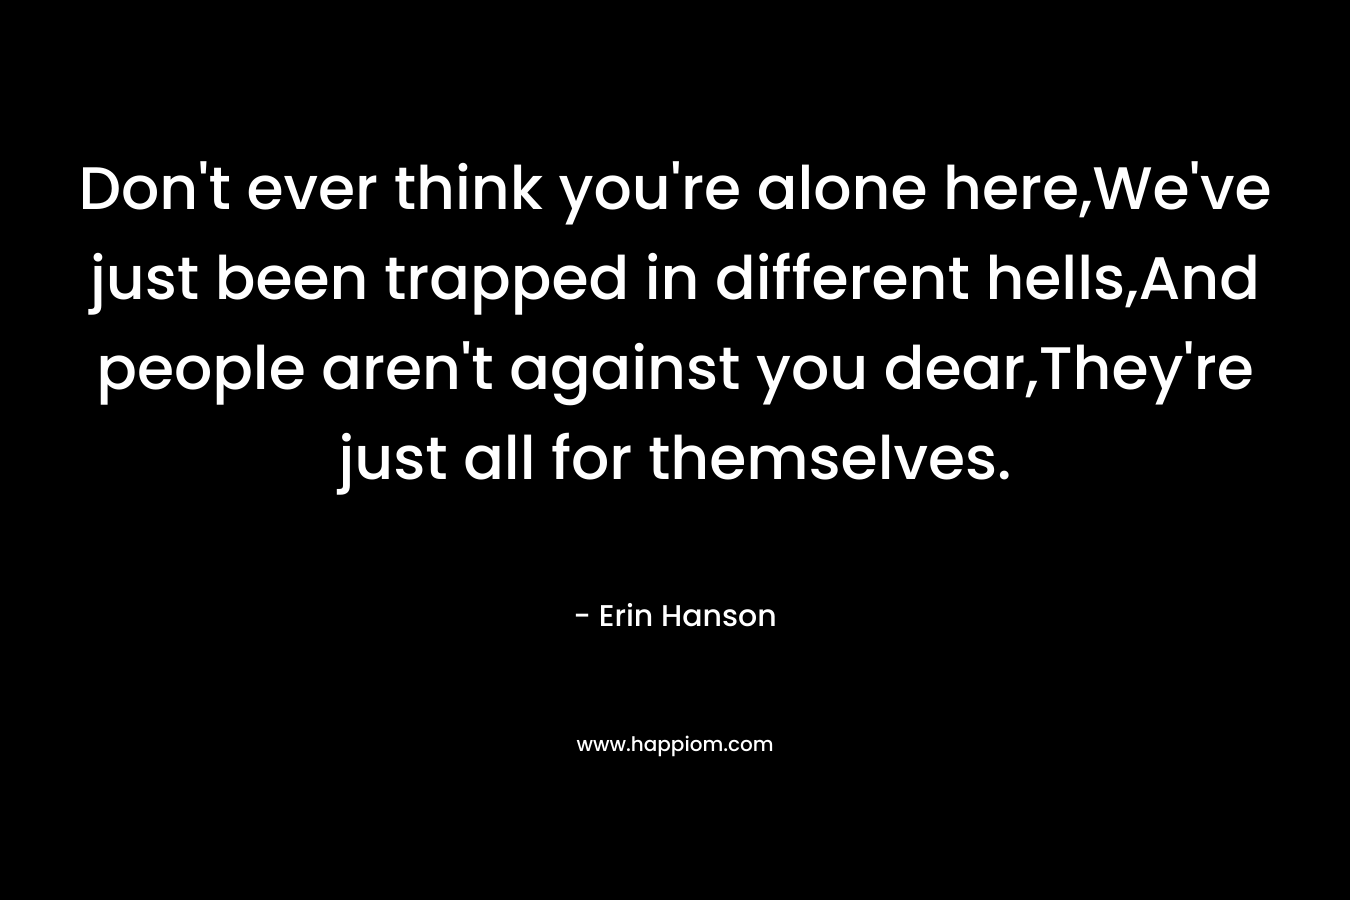 Don’t ever think you’re alone here,We’ve just been trapped in different hells,And people aren’t against you dear,They’re just all for themselves. – Erin Hanson